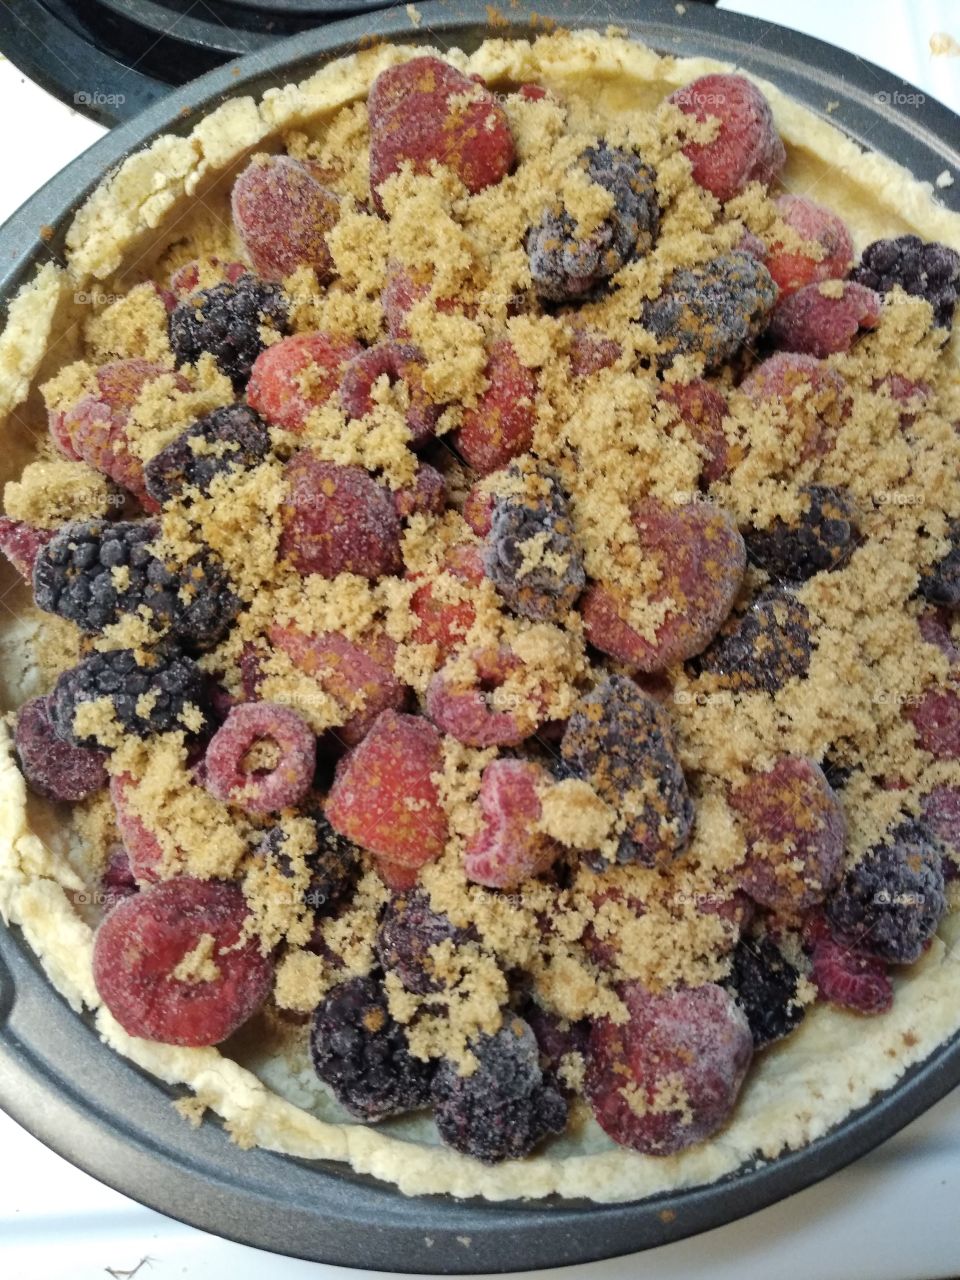 Homemade berry pie before going into oven